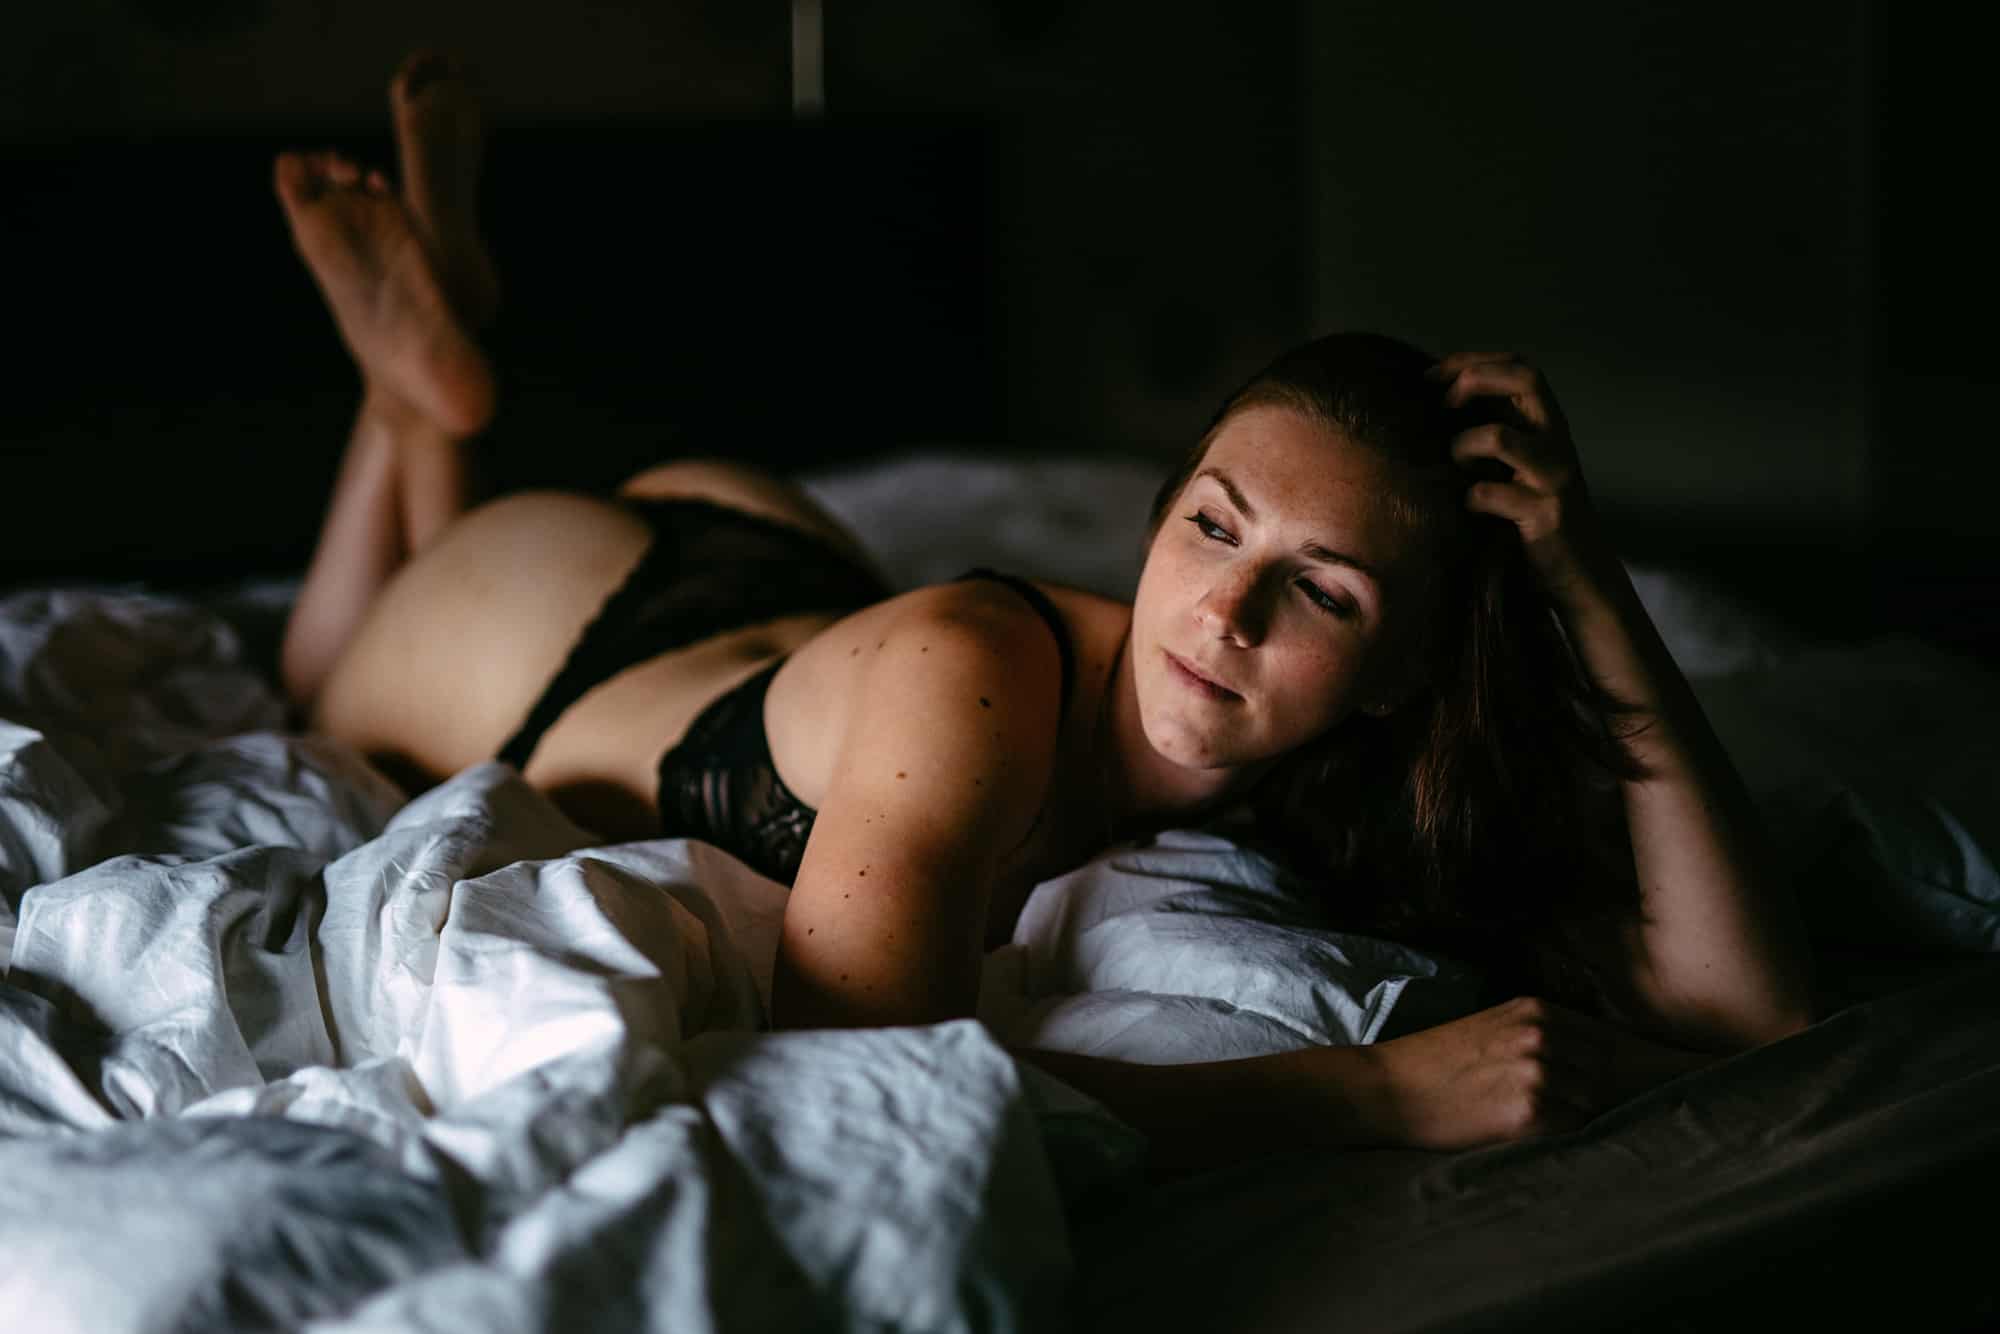 A woman in black lingerie lying on a bed.